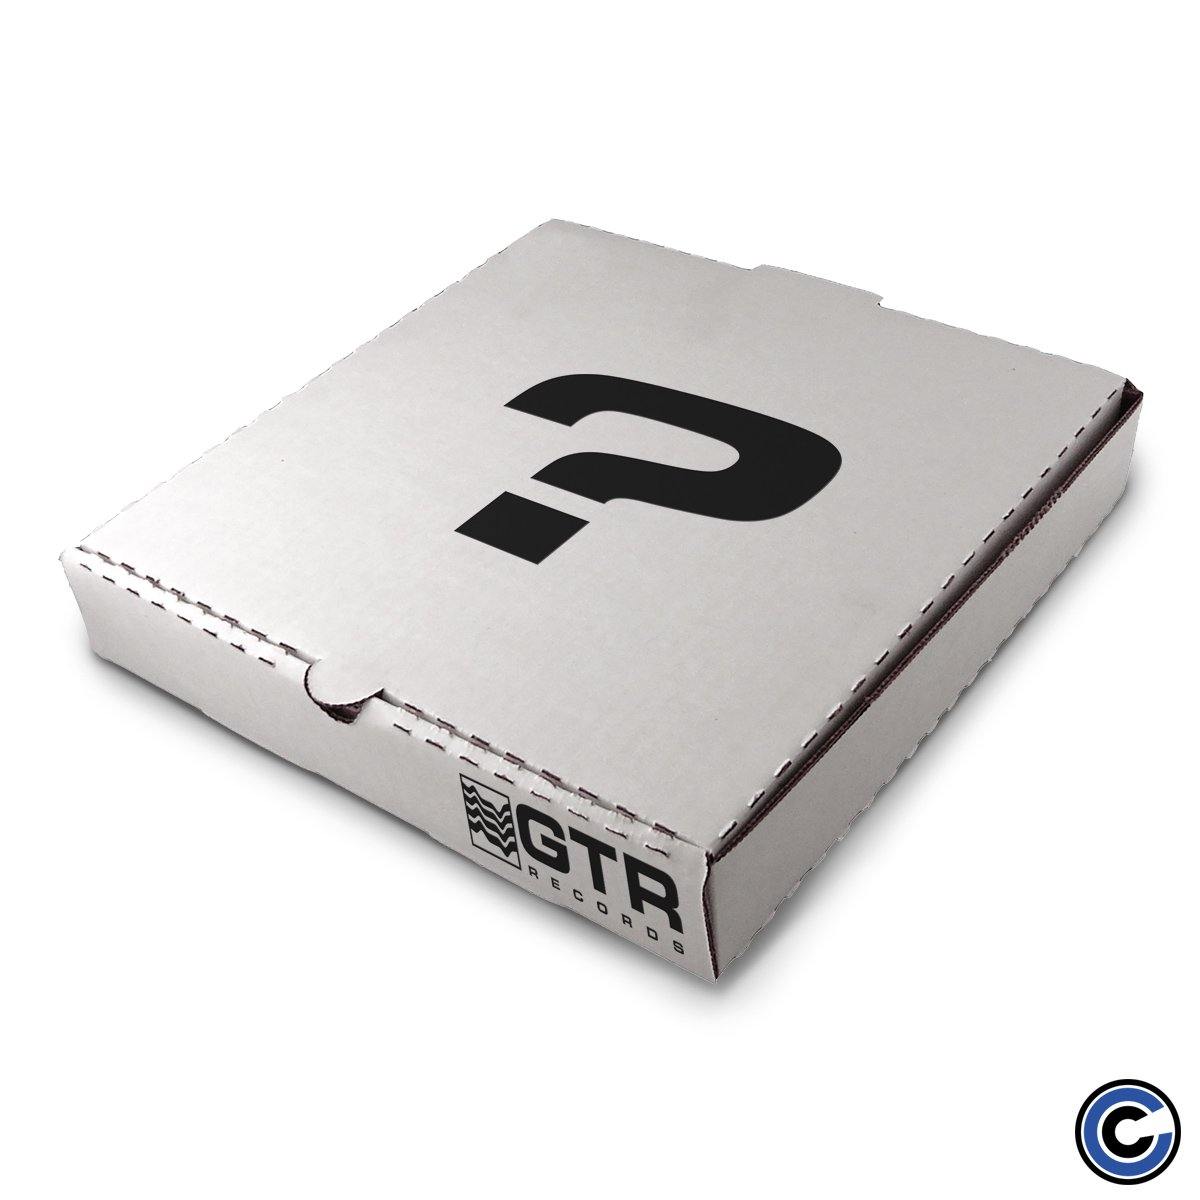 Buy – Get This Right Records "Mystery Box" – Band & Music Merch – Cold Cuts Merch